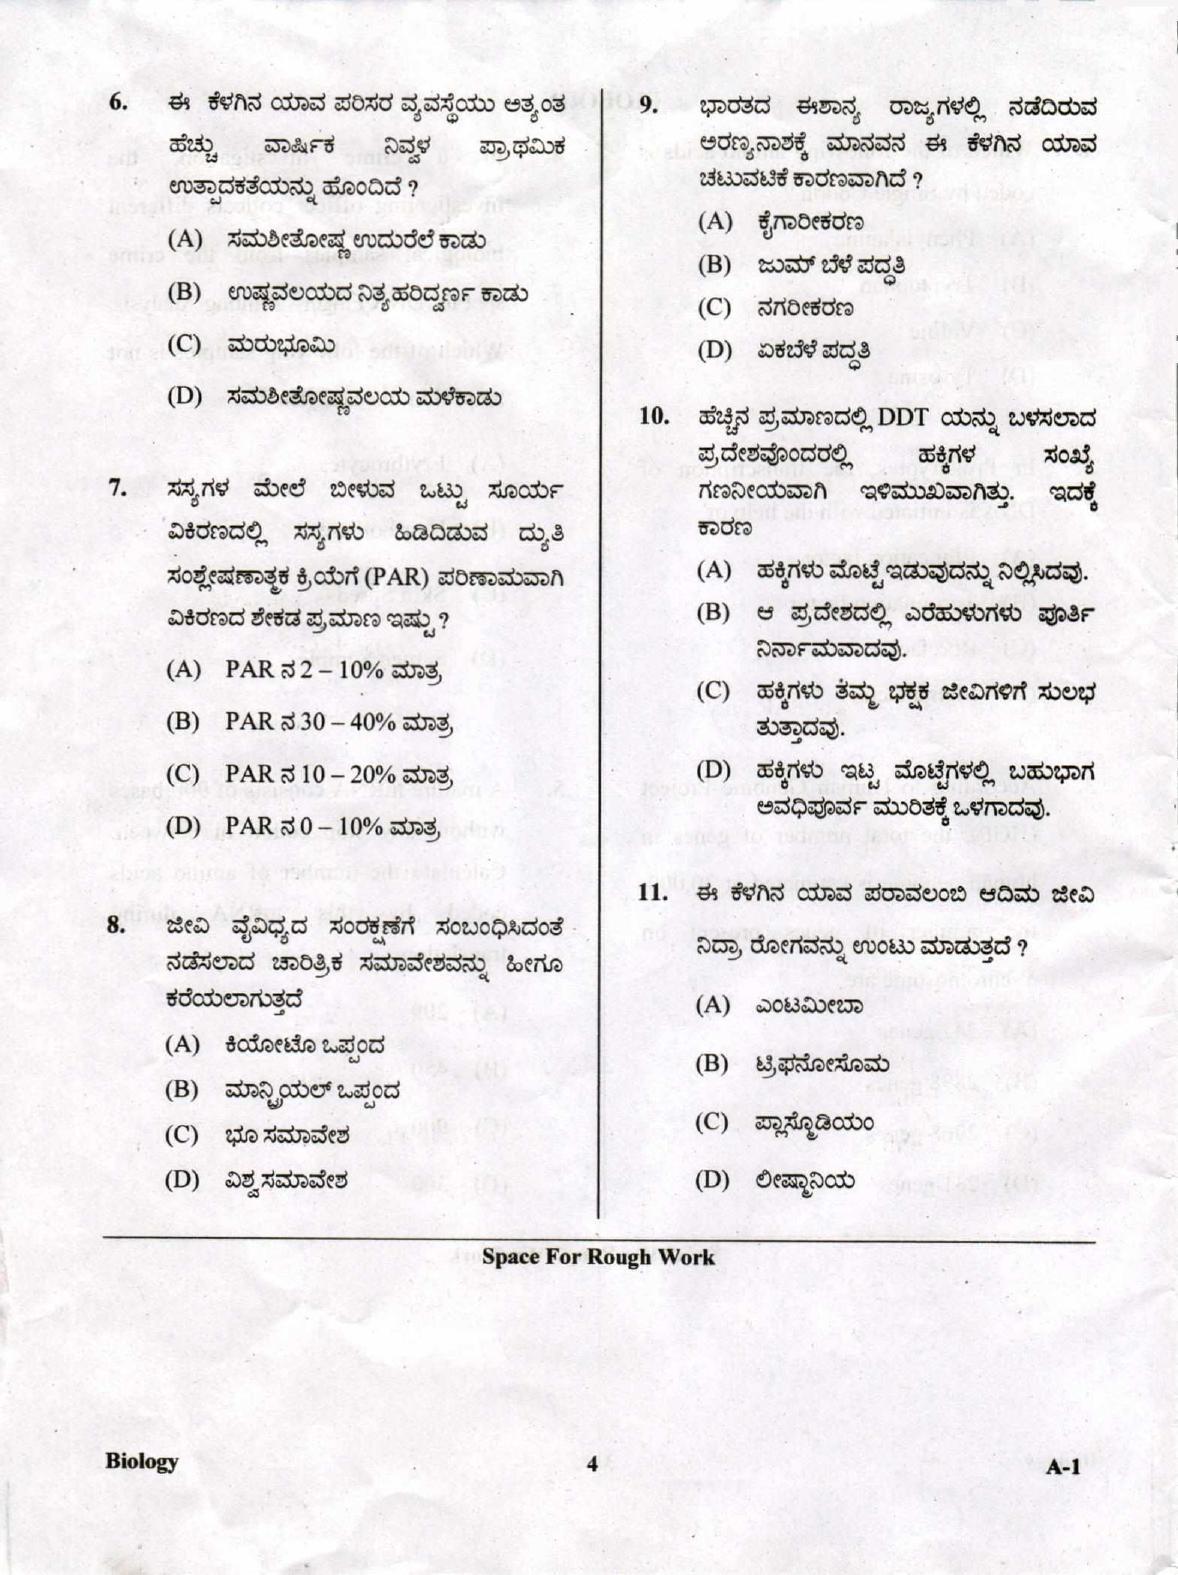 KCET Biology 2019 Question Papers - Page 4